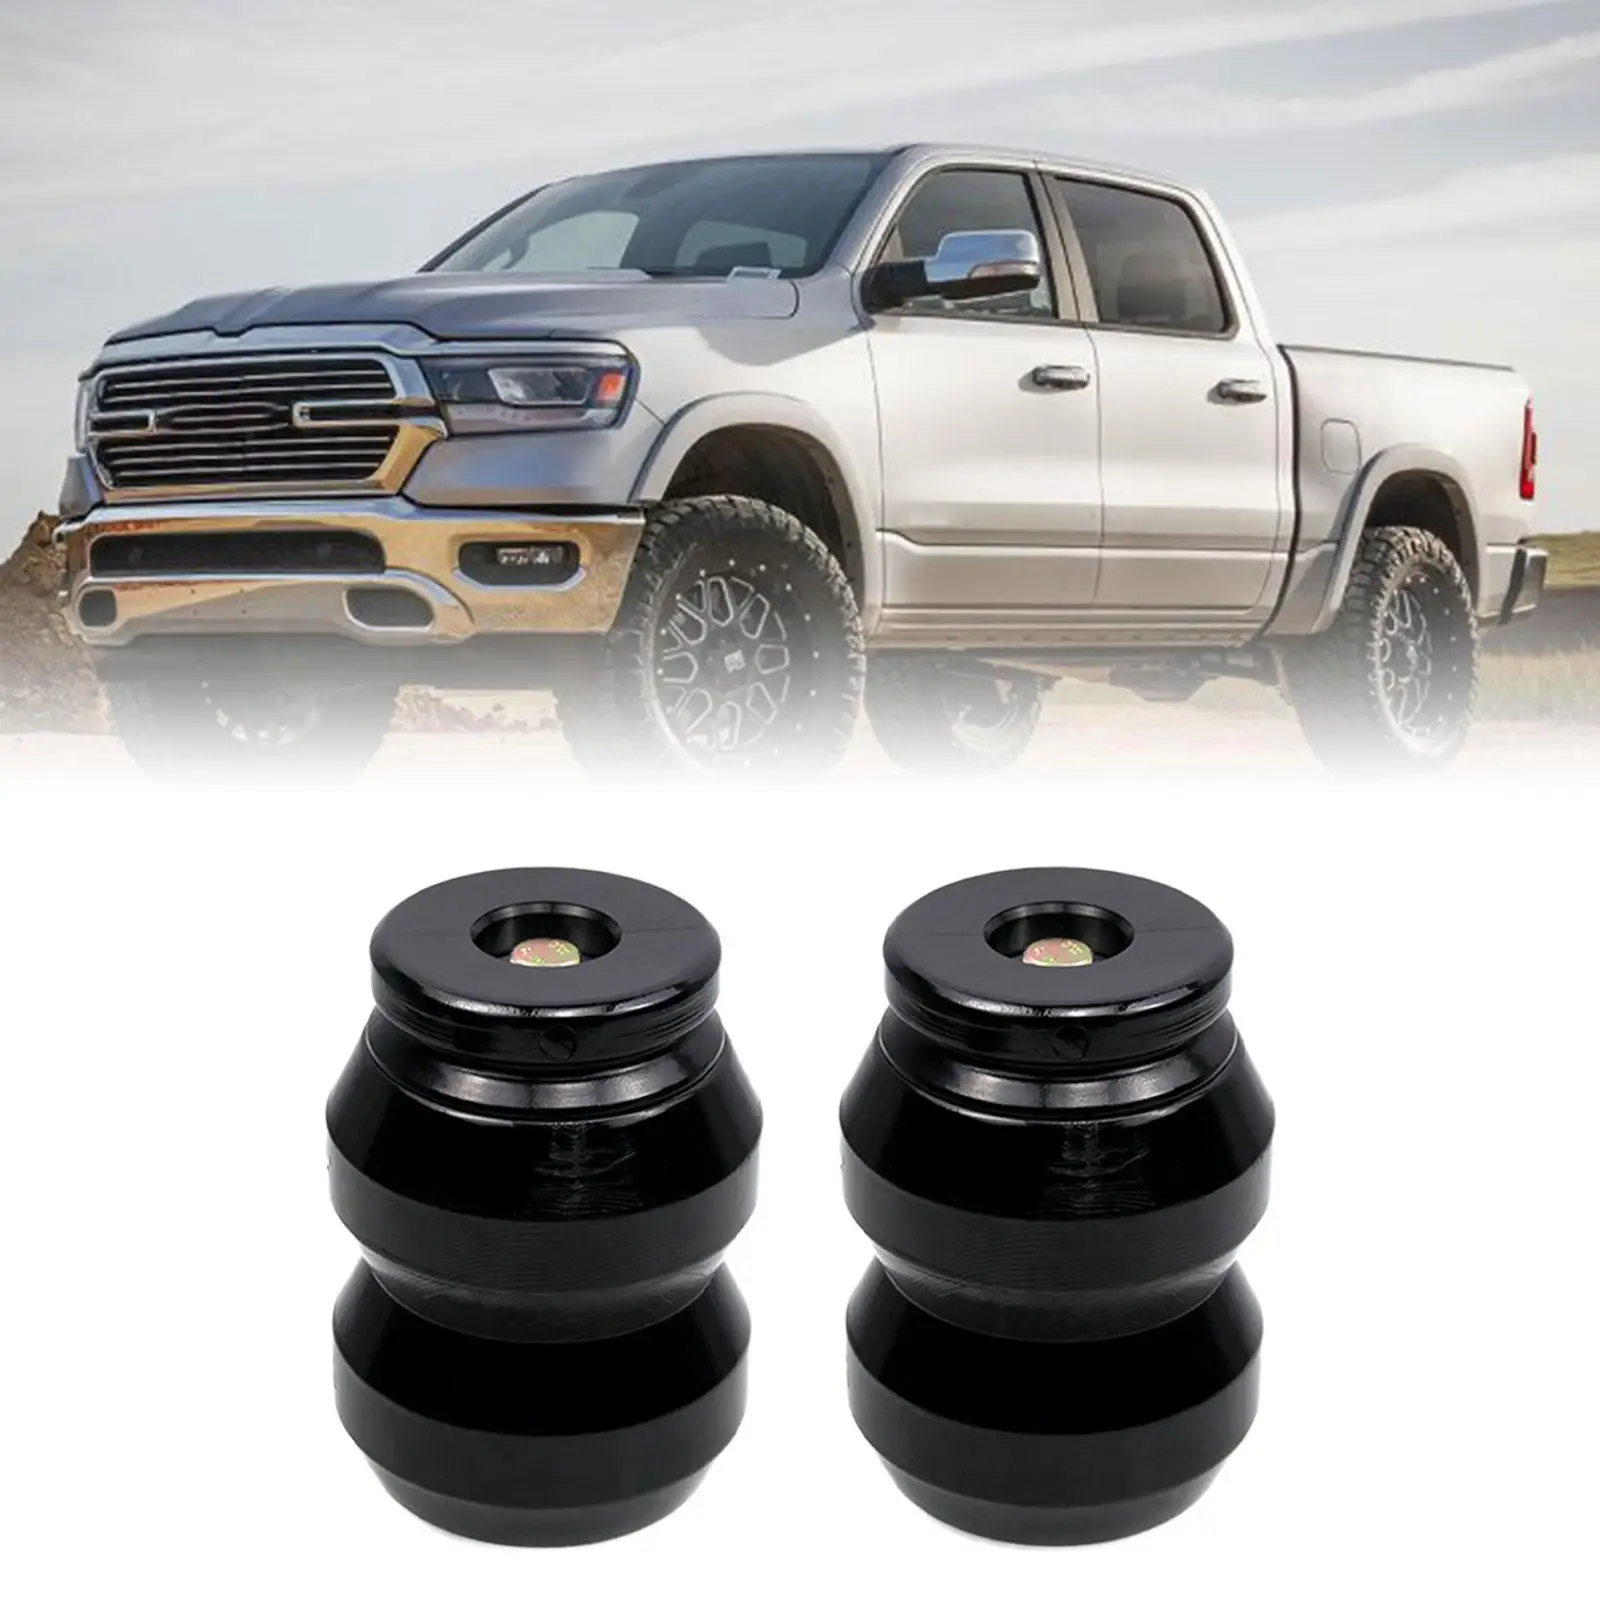 2 Pieces Suspension Enhancement System DR1500dq Durable Easy Installation for Dodge RAM 1500 2WD 4WD 2009-2021 Accessory